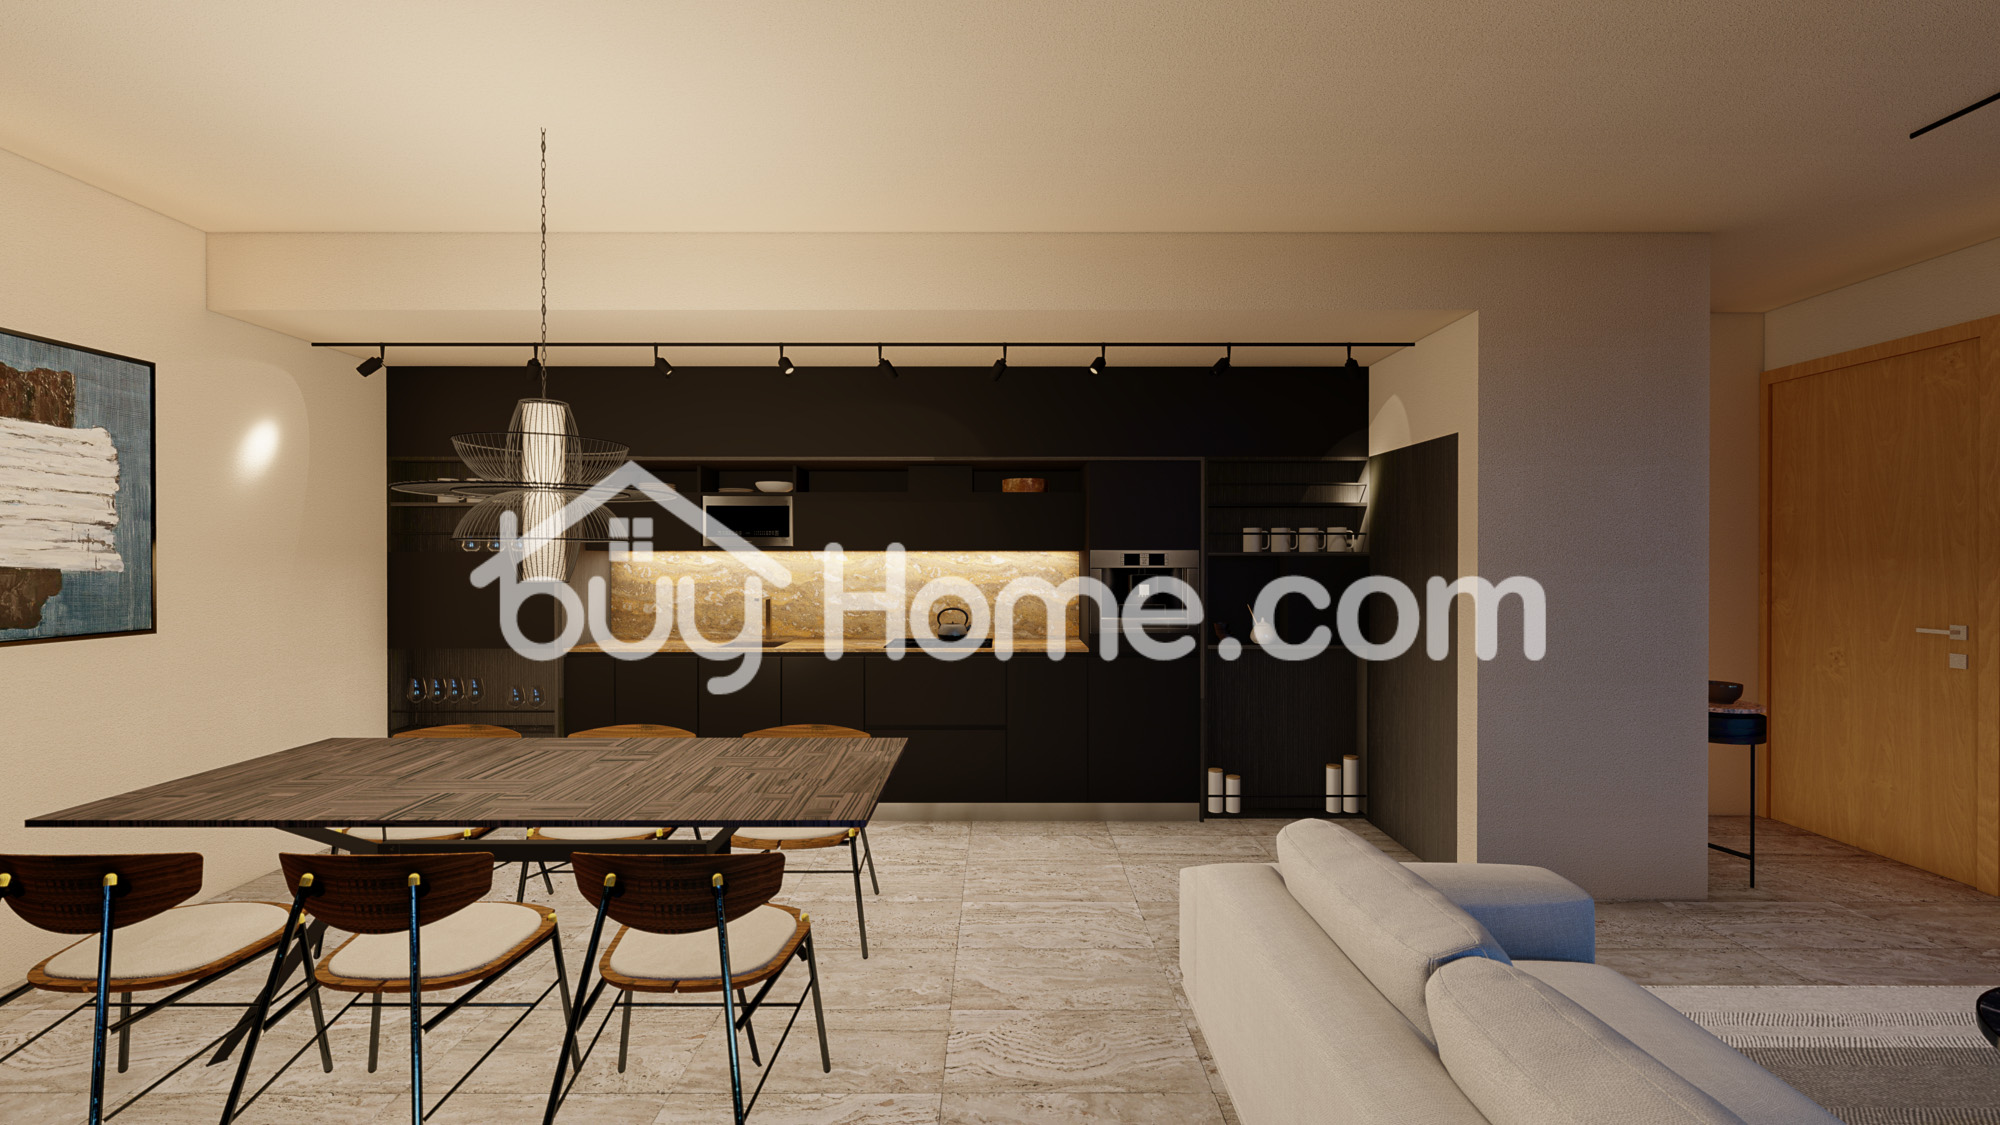 1 BDR apartment | BuyHome